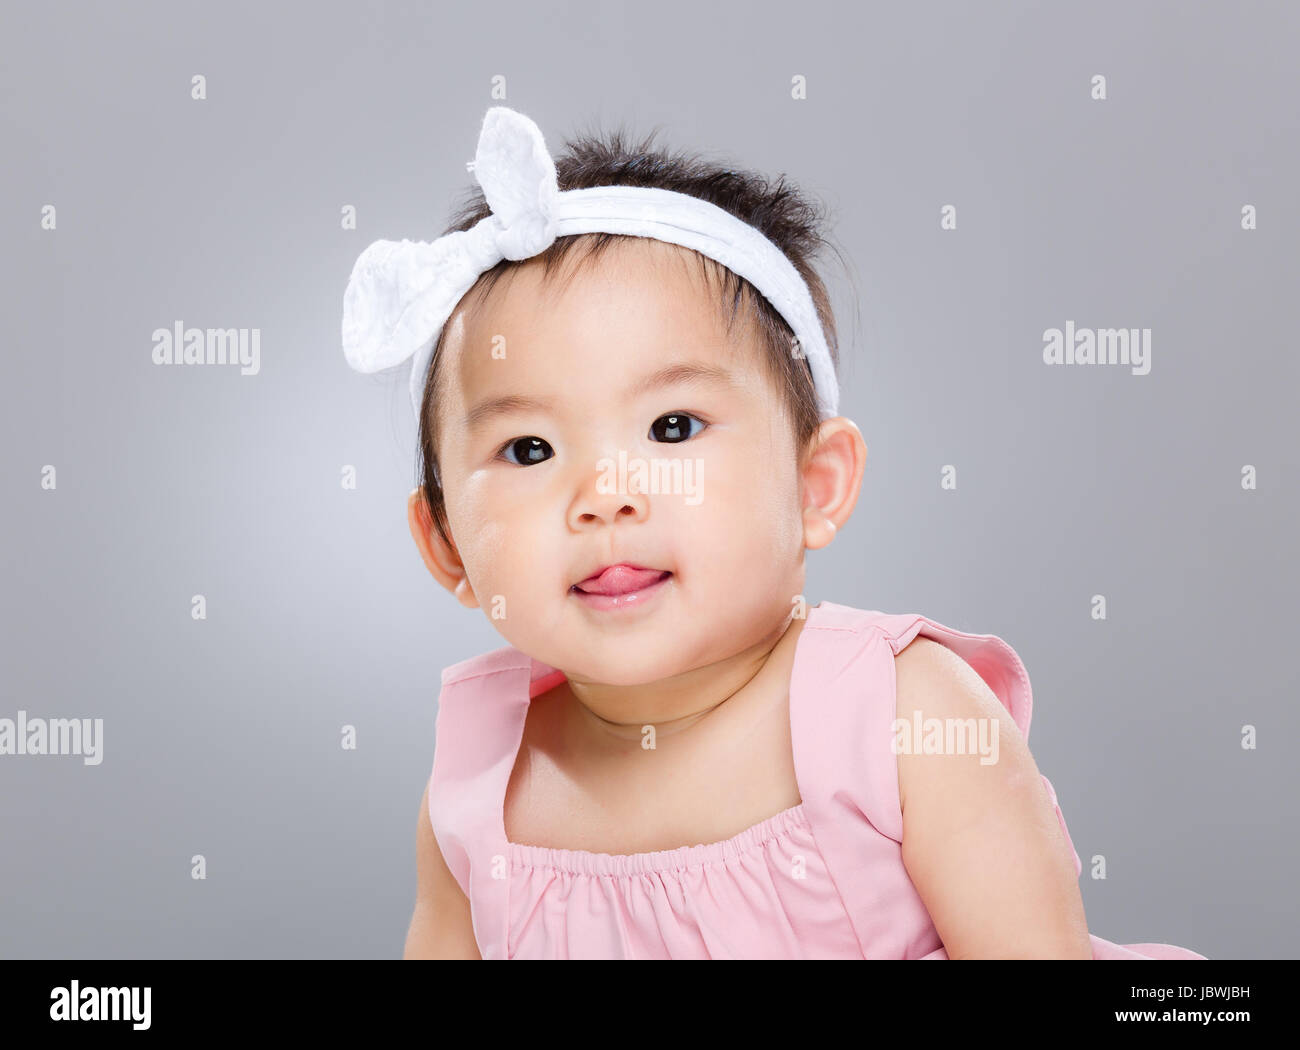 Adorable baby girl with lick sticking out Stock Photo - Alamy